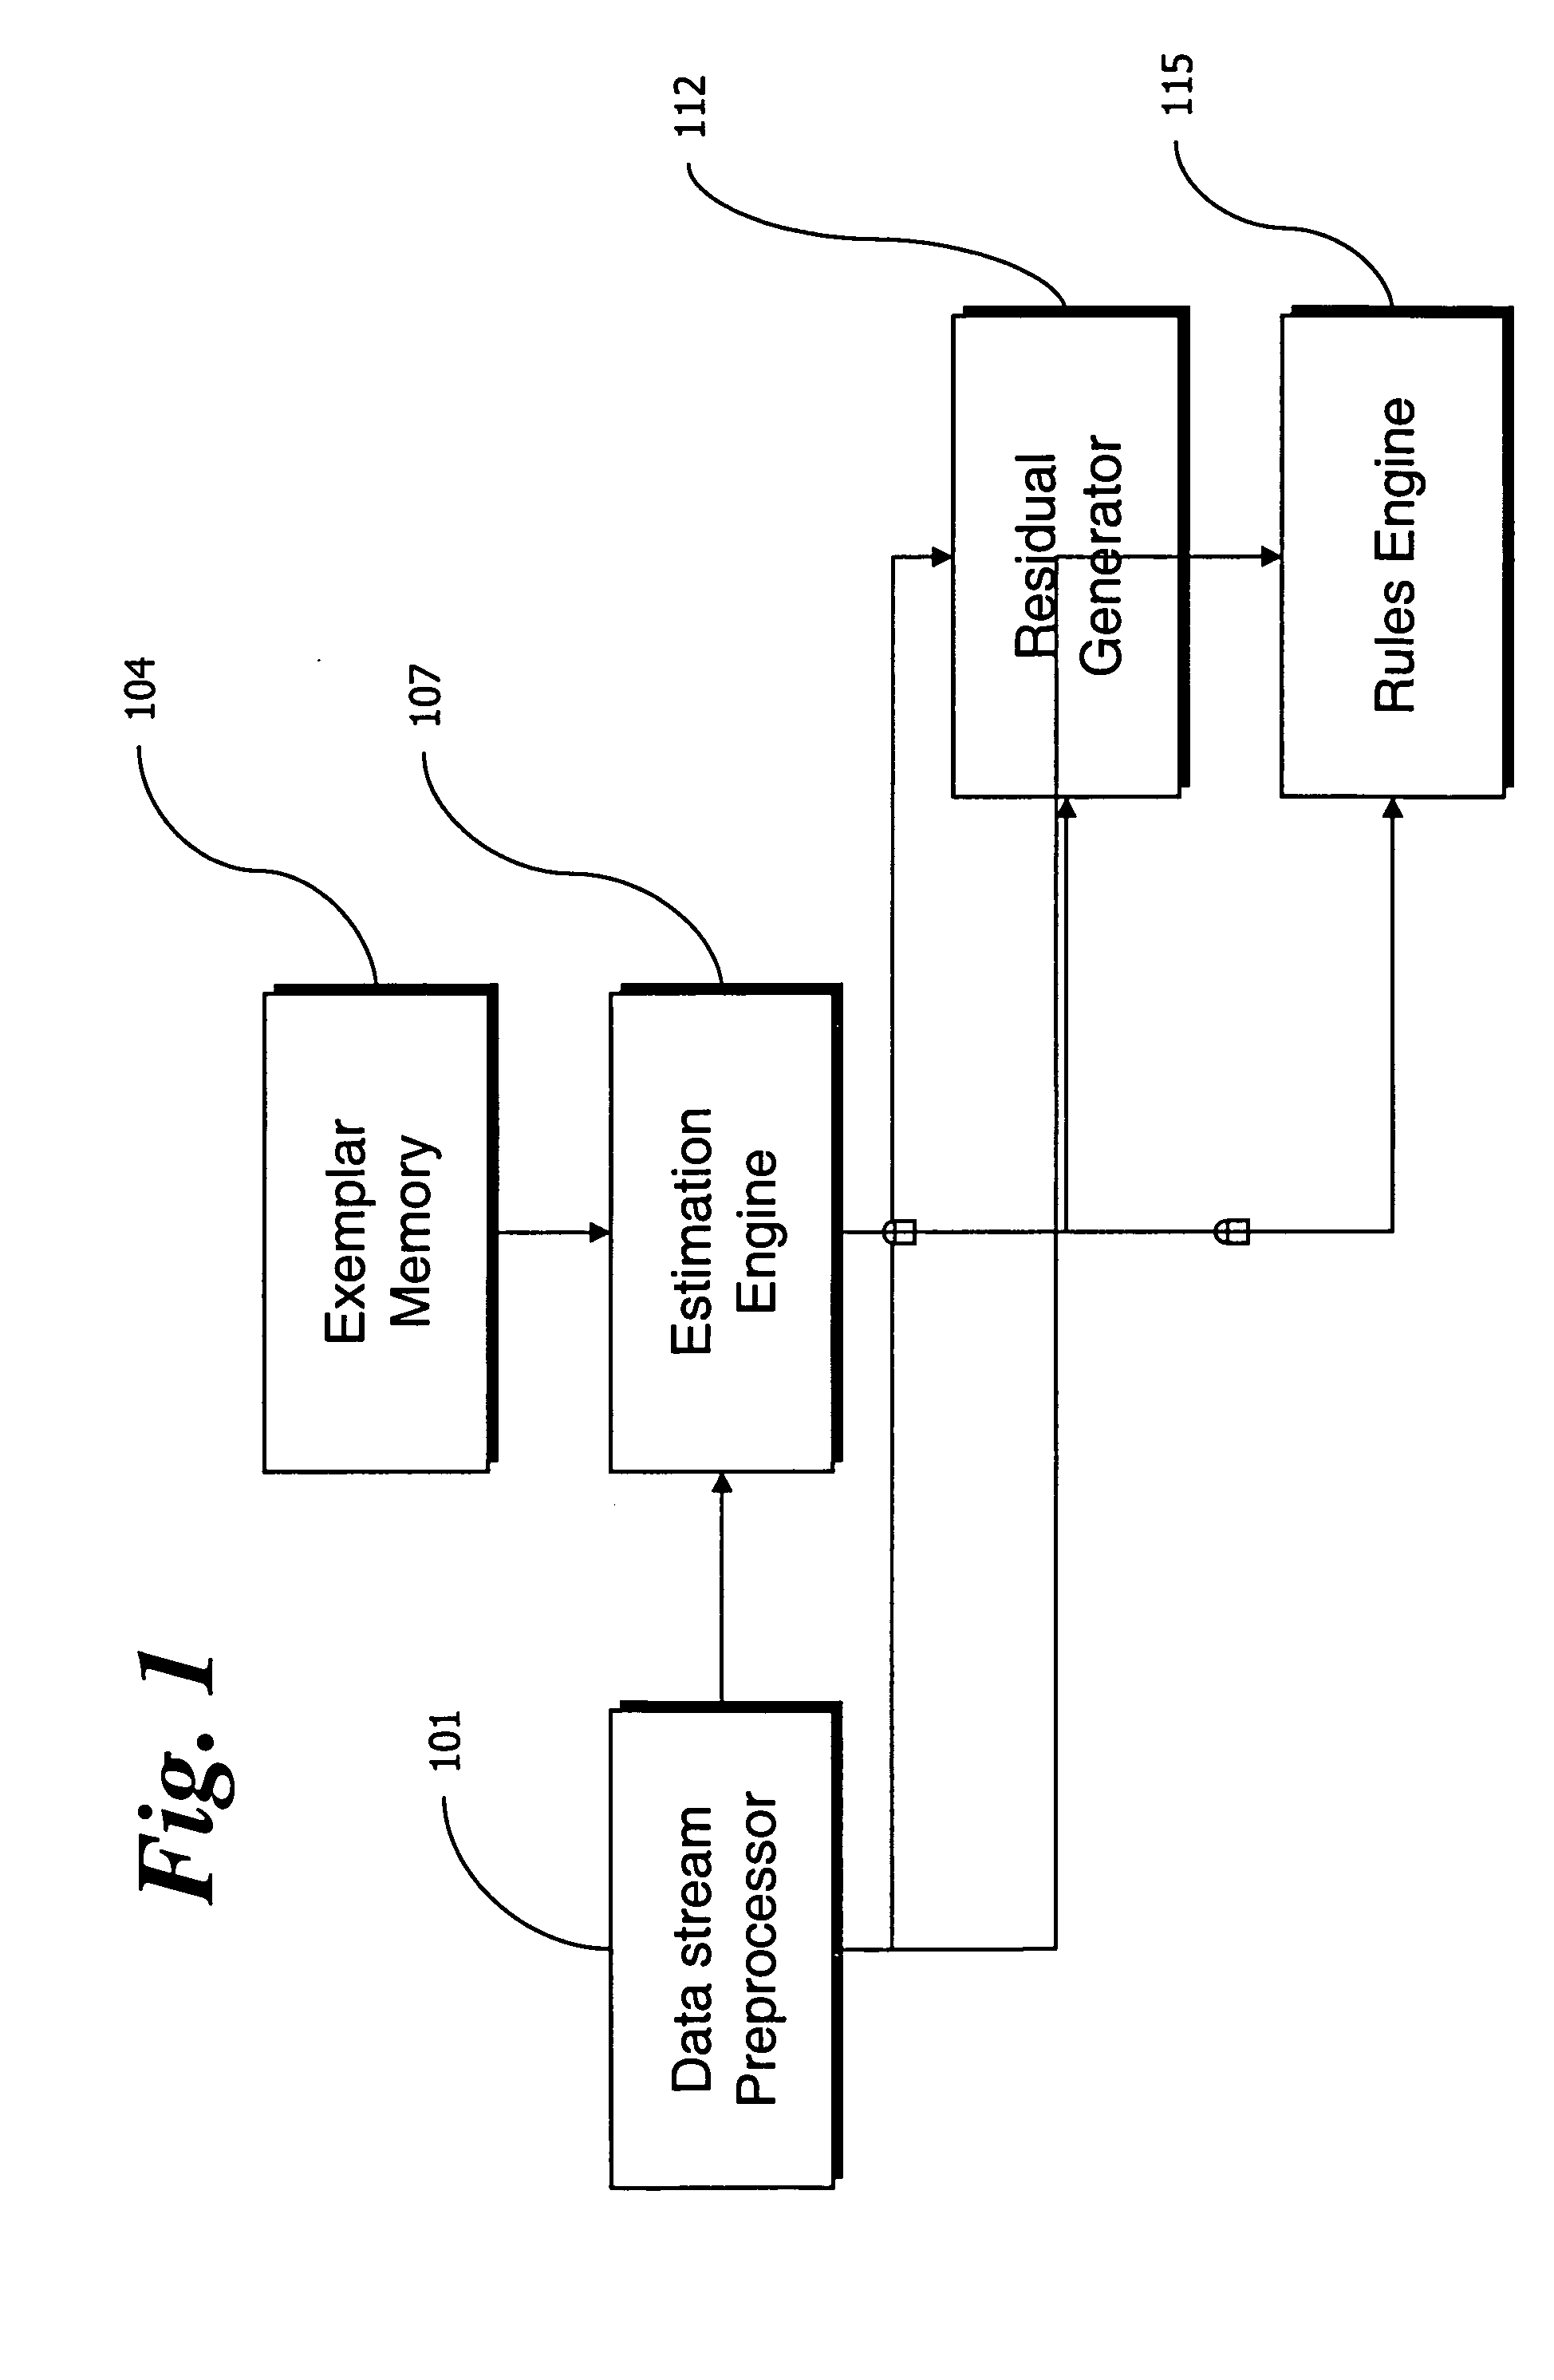 Kernel-based system and method for estimation-based equipment condition monitoring